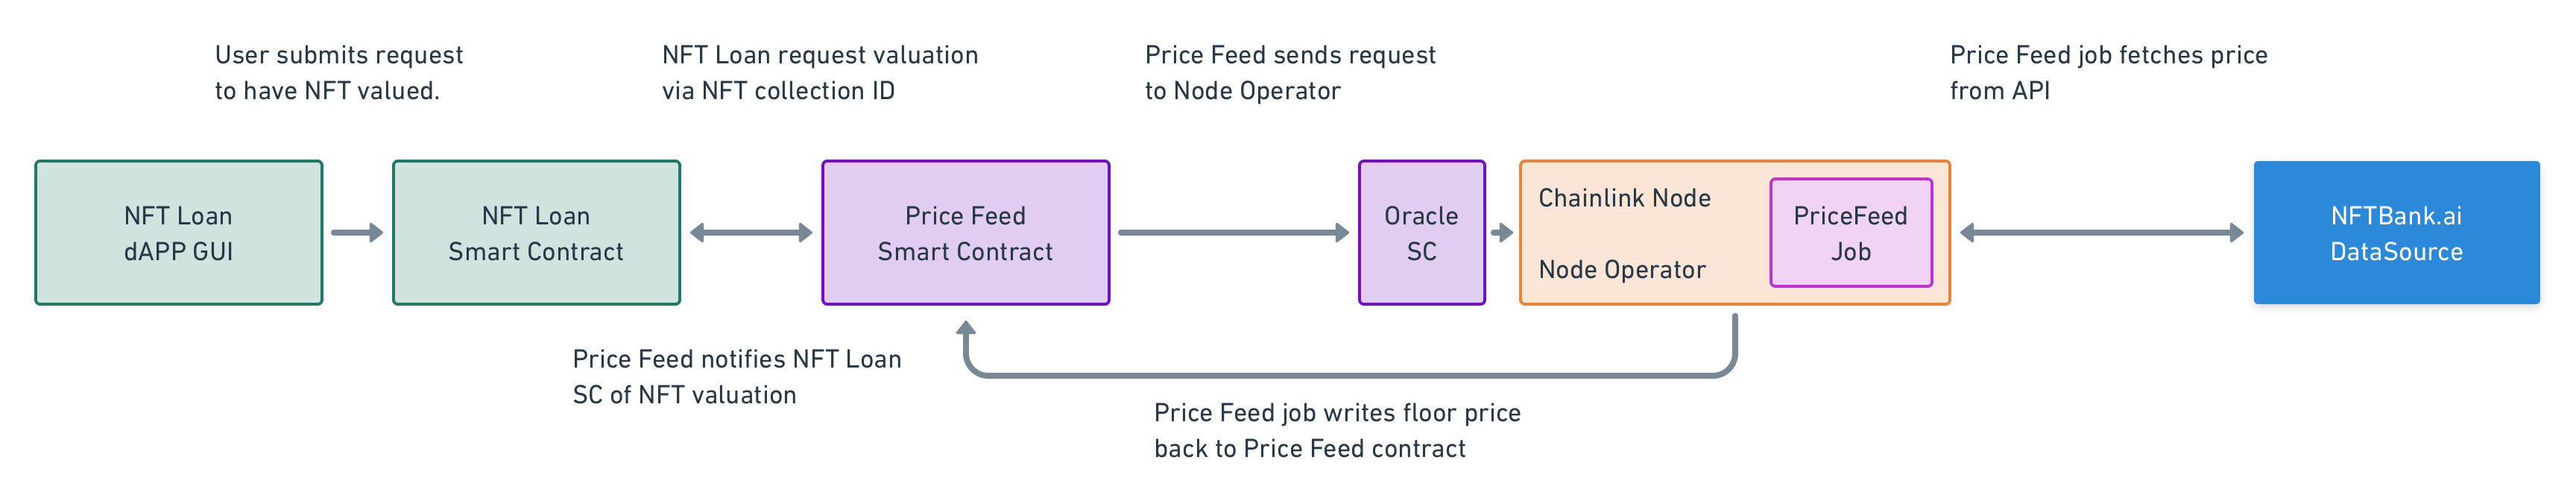 Ad-hoc Direct Request data feed